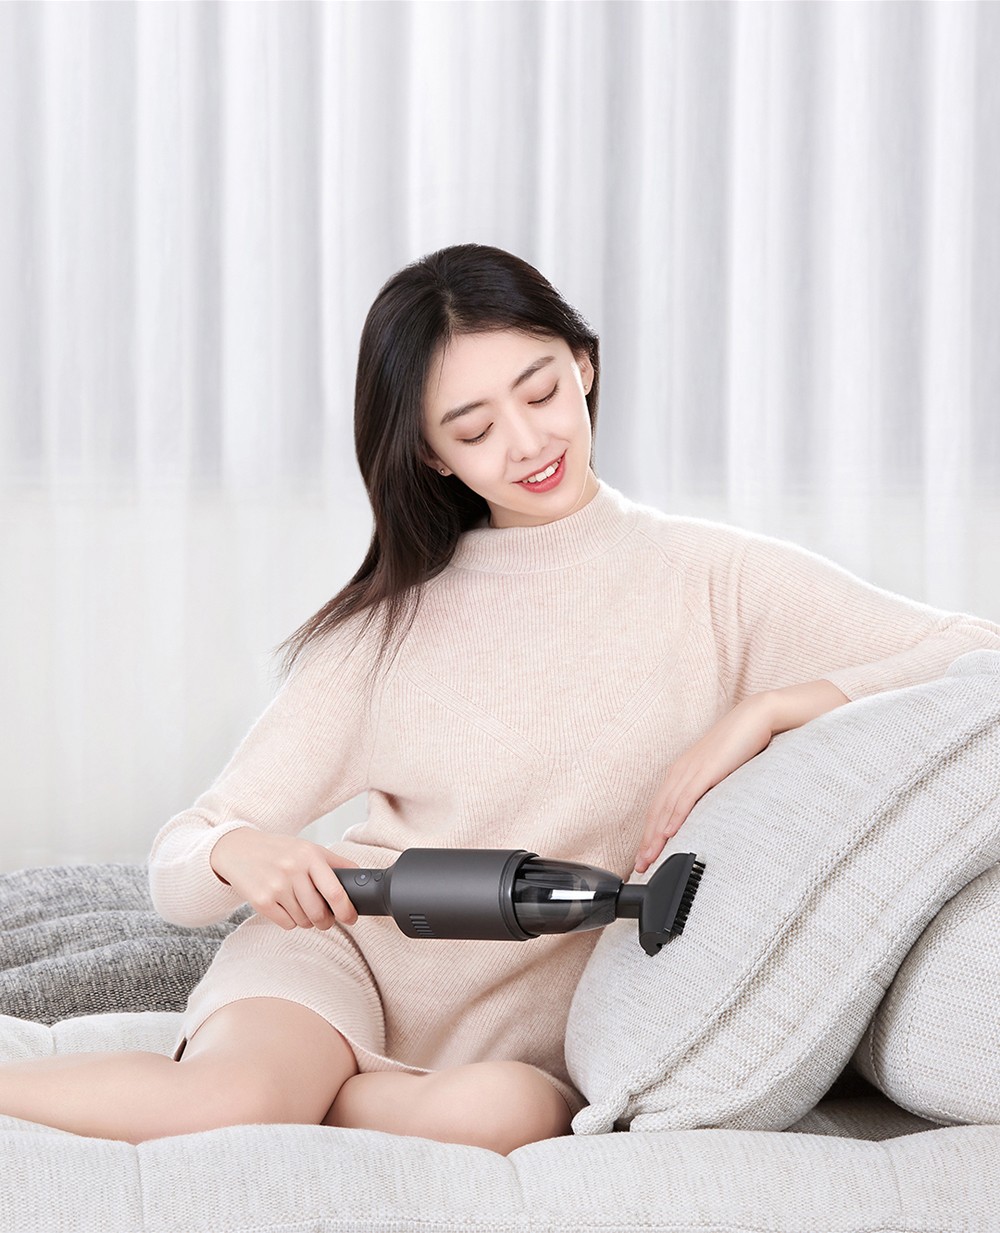 Shunzao Z1 Pro Portable Handheld Vacuum Cleaner, 15.5Kpa Suction, 2-gear Speed, 0.1L Dust Cup, 2000mAh Battery, Type-C Charging